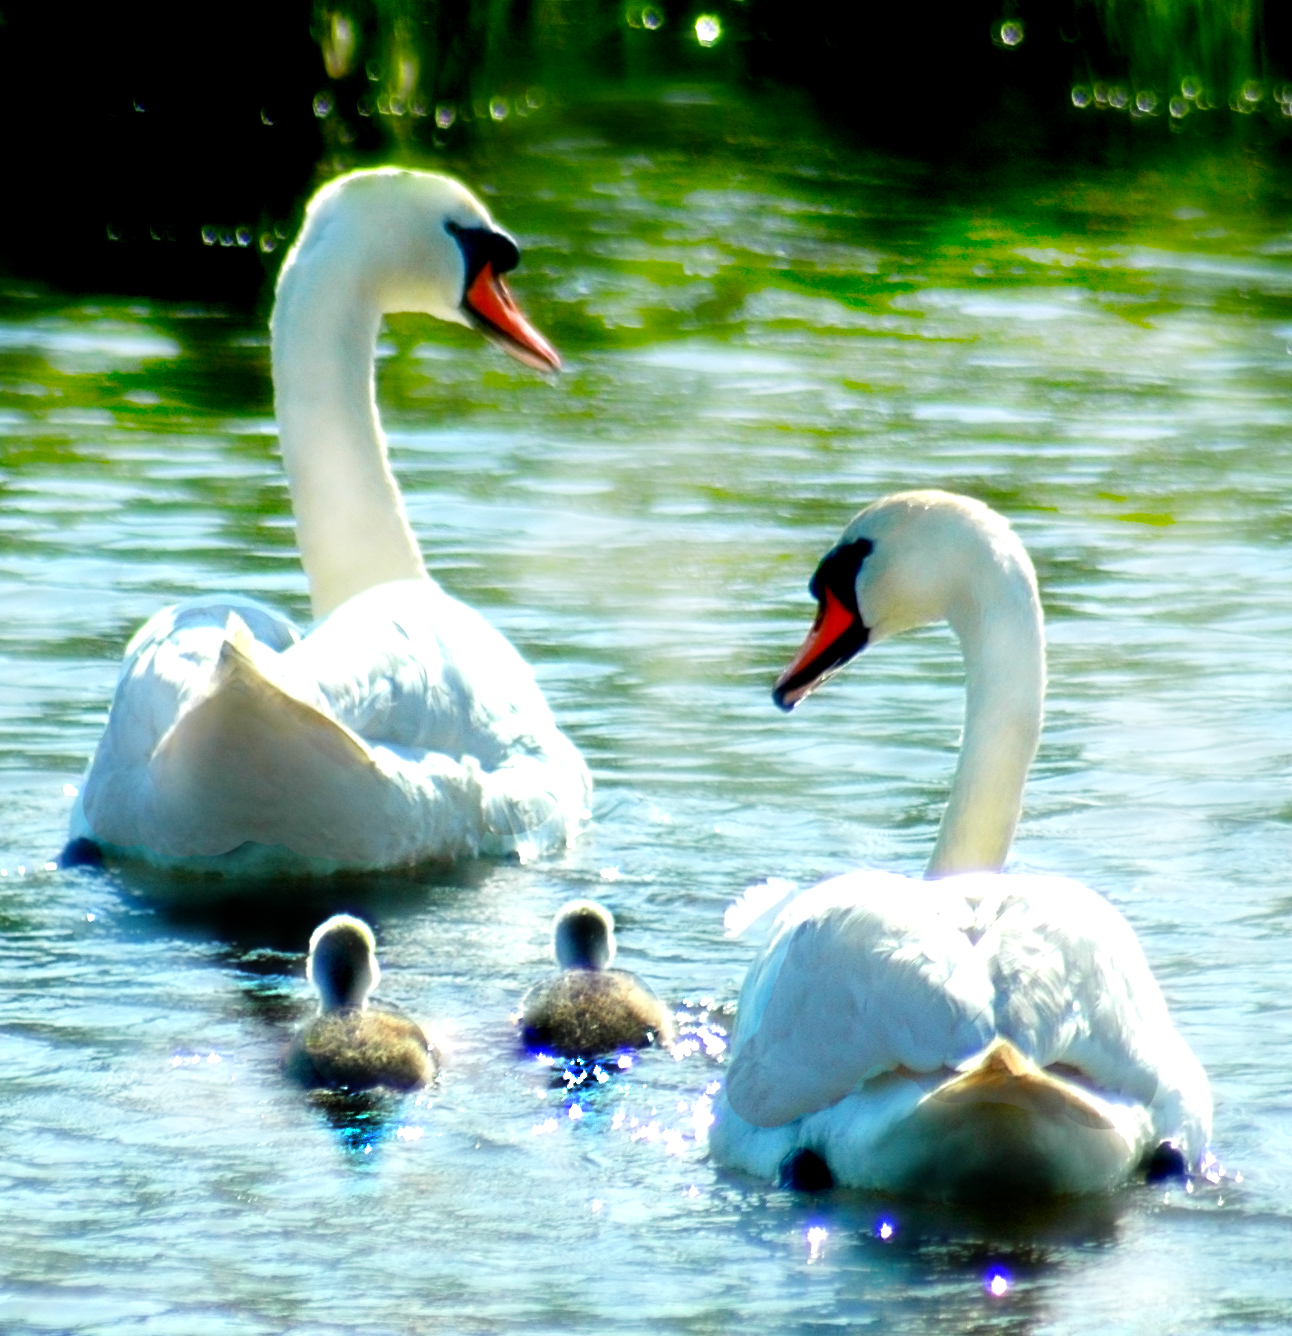 two swans and their babies swimming in a pond